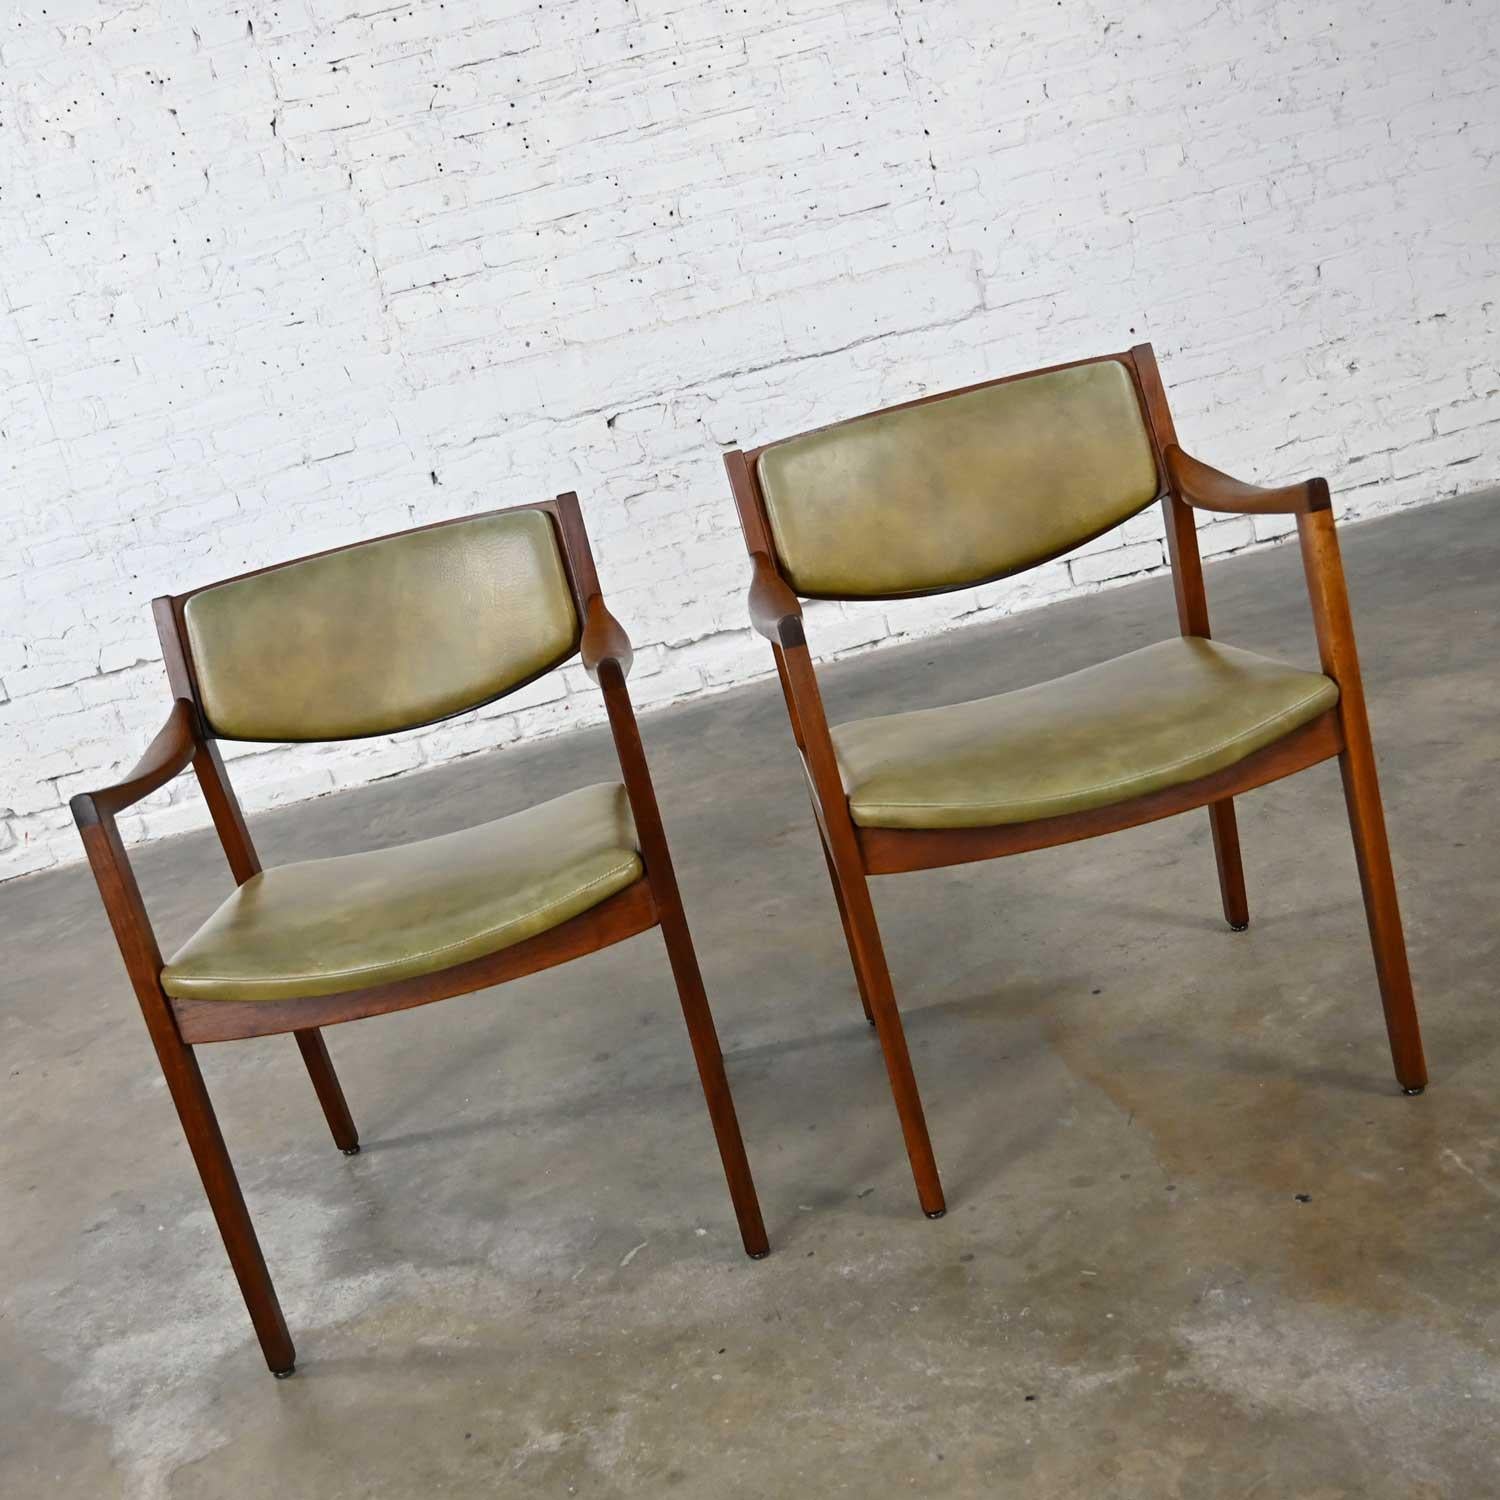 Awesome mid-century modern solid walnut and original olive-green faux leather armchairs by Gunlocke. Beautiful condition, keeping in mind that these are vintage and not new so will have signs of use and wear. These chairs have been freshly stained